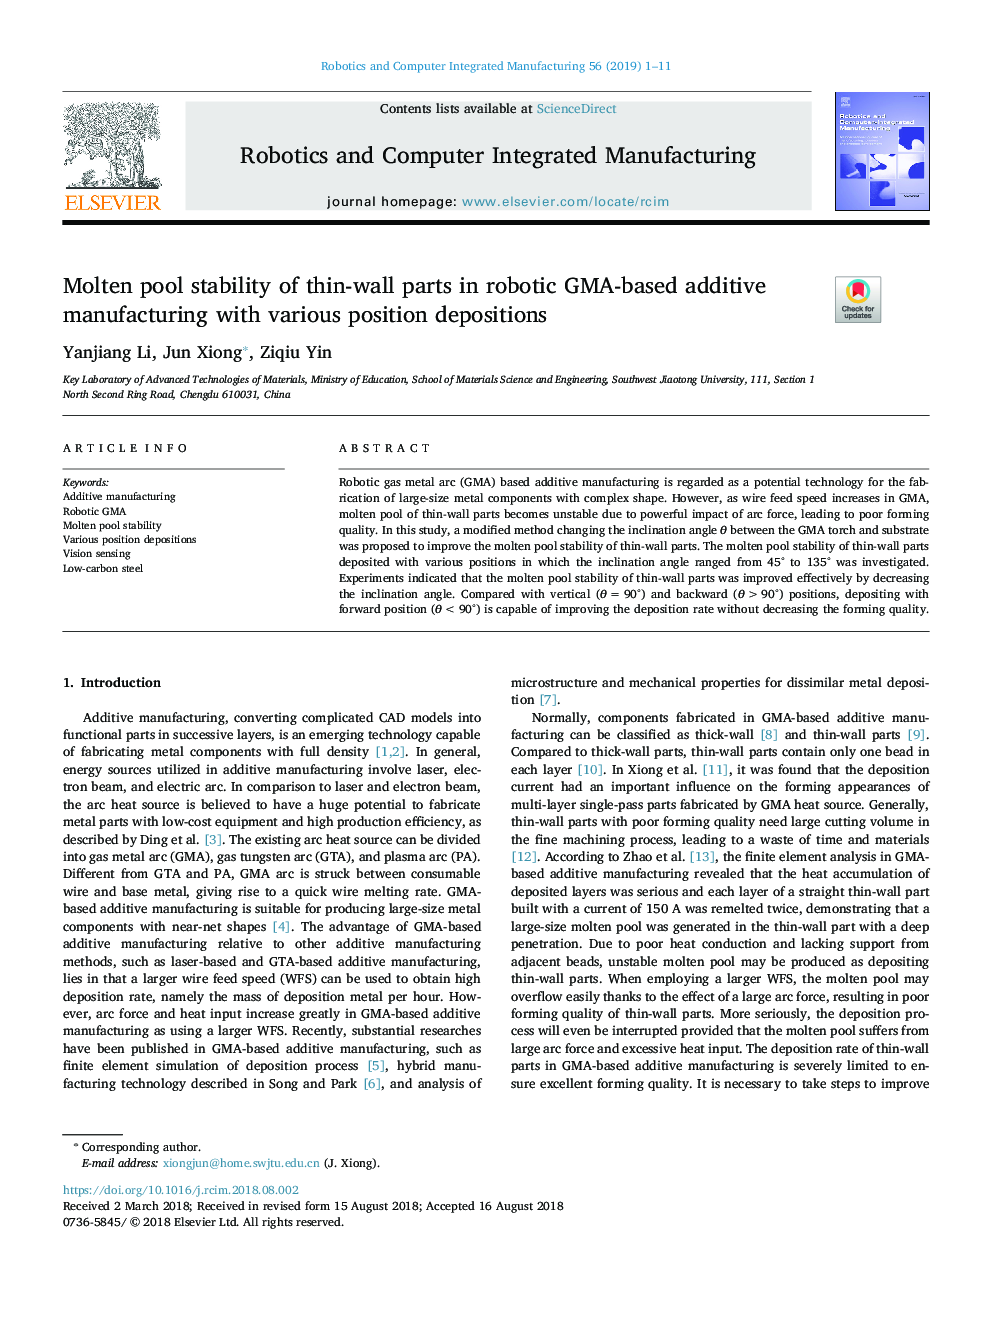 Molten pool stability of thin-wall parts in robotic GMA-based additive manufacturing with various position depositions